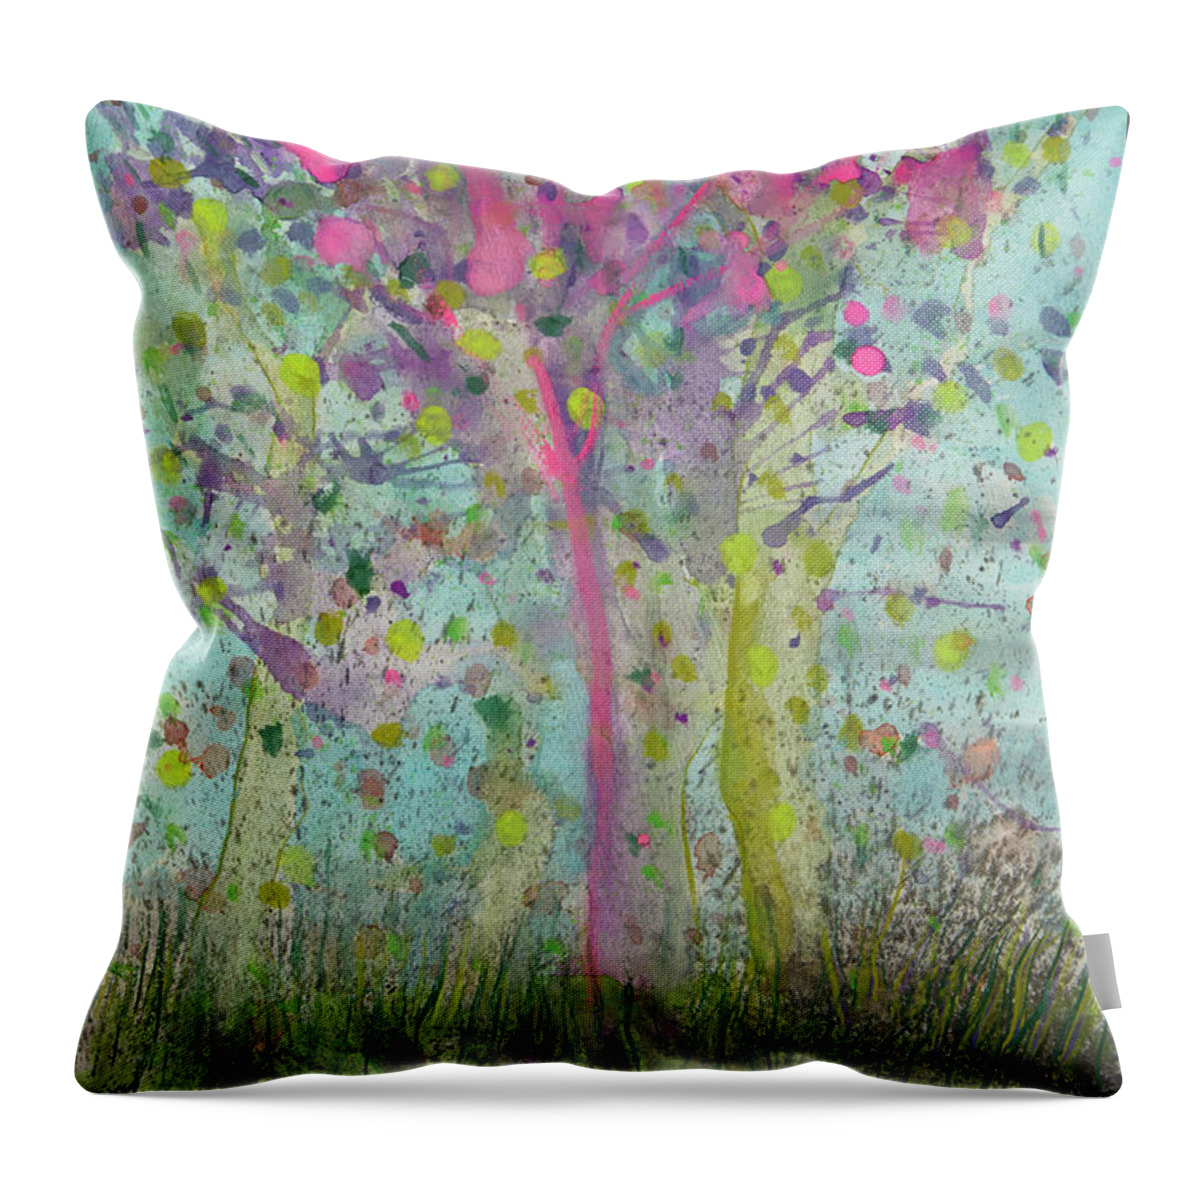 Abstract Throw Pillow featuring the painting Beauty of Life by Tessa Evette